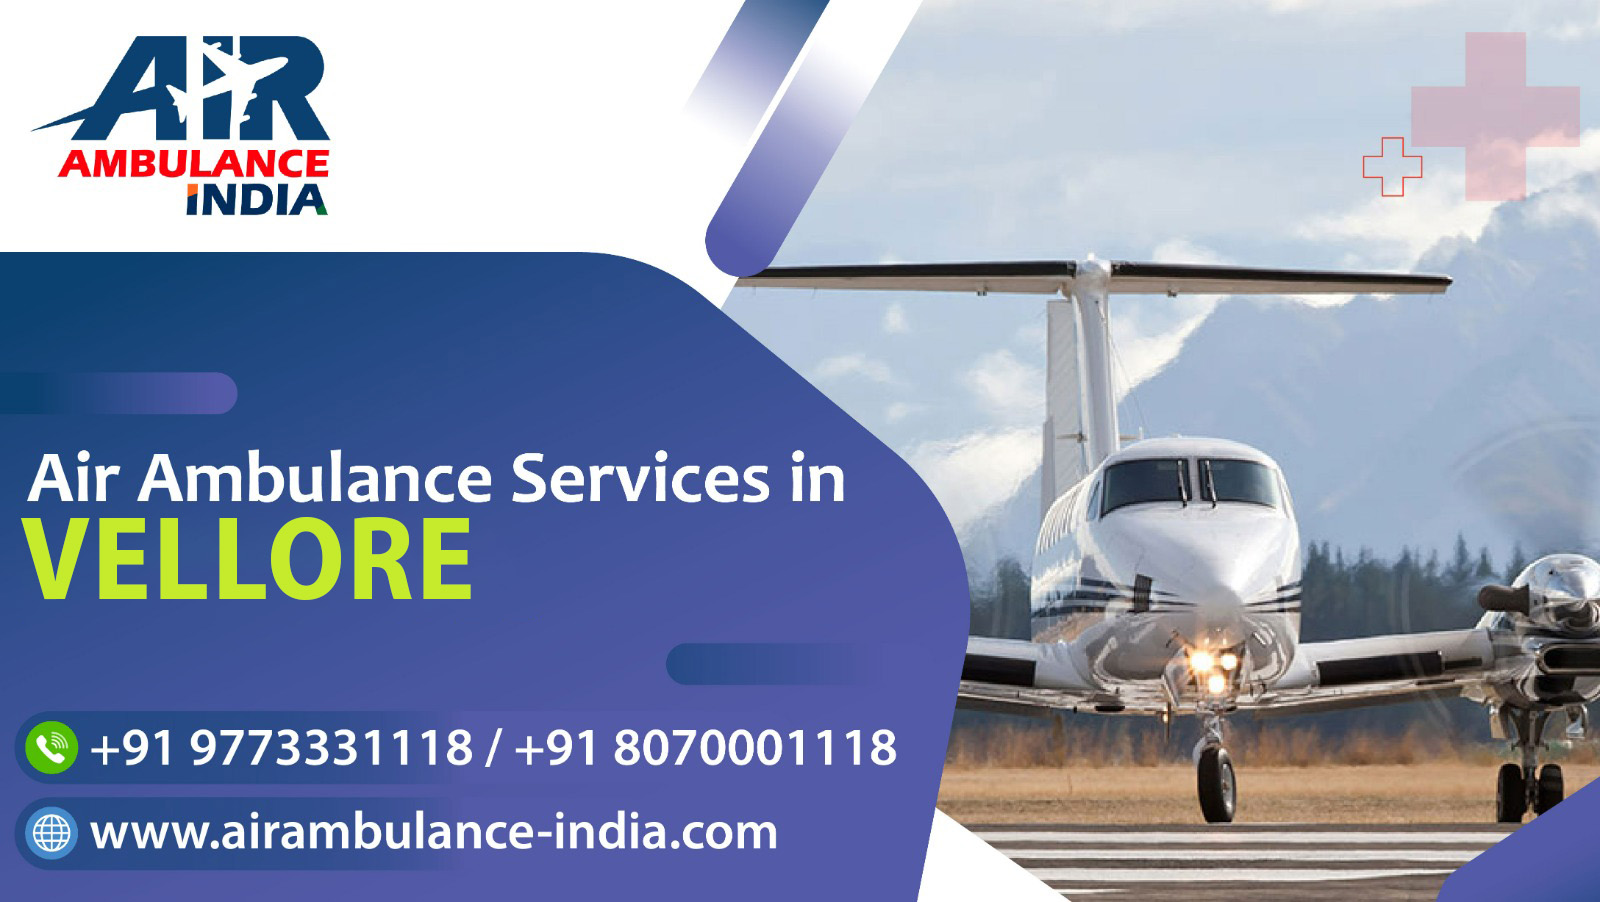 Air Ambulance Services in Vellore